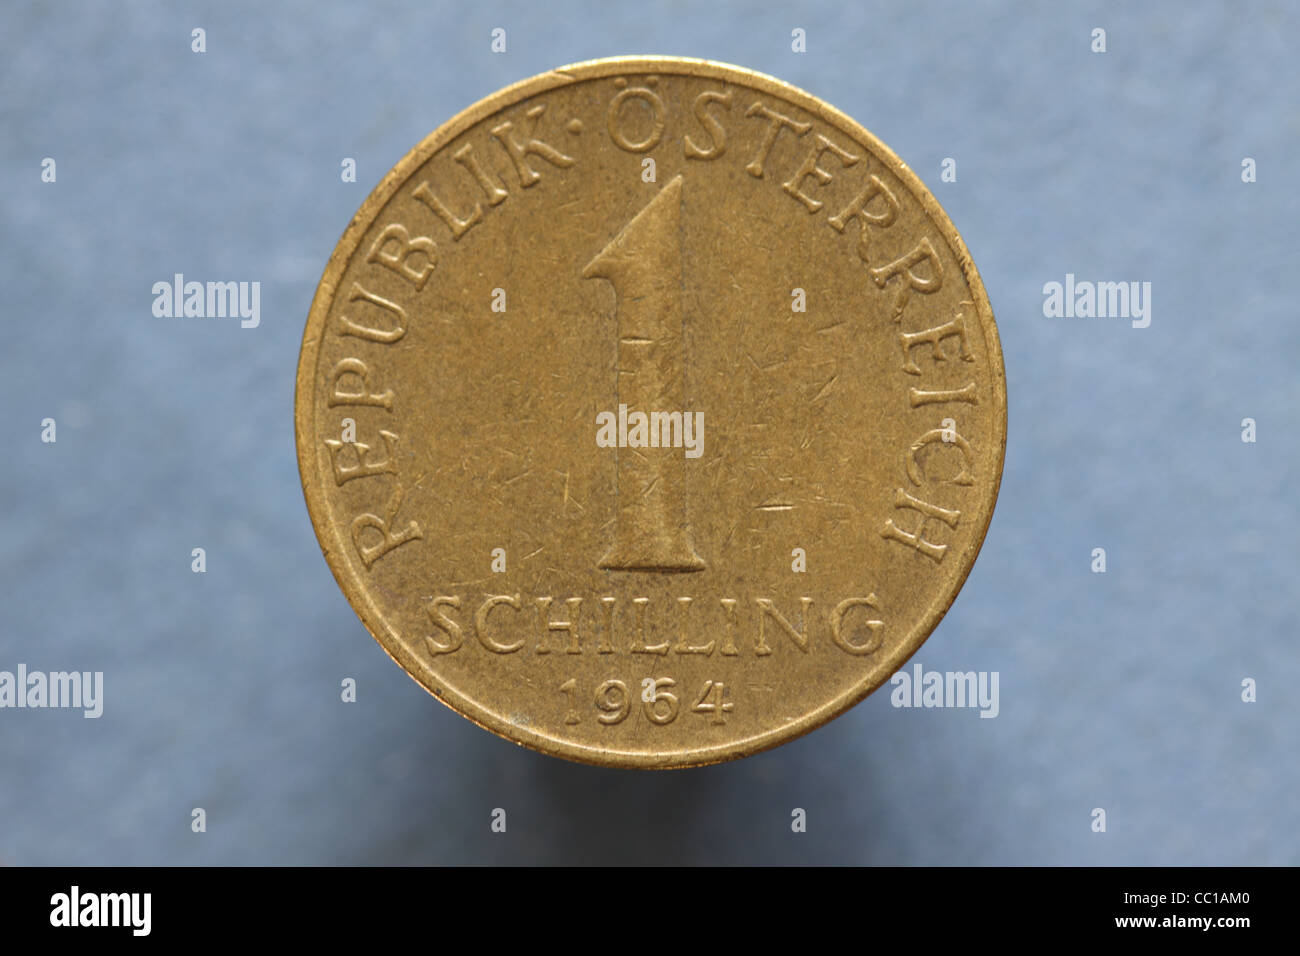 What is a 1964 quarter made of?